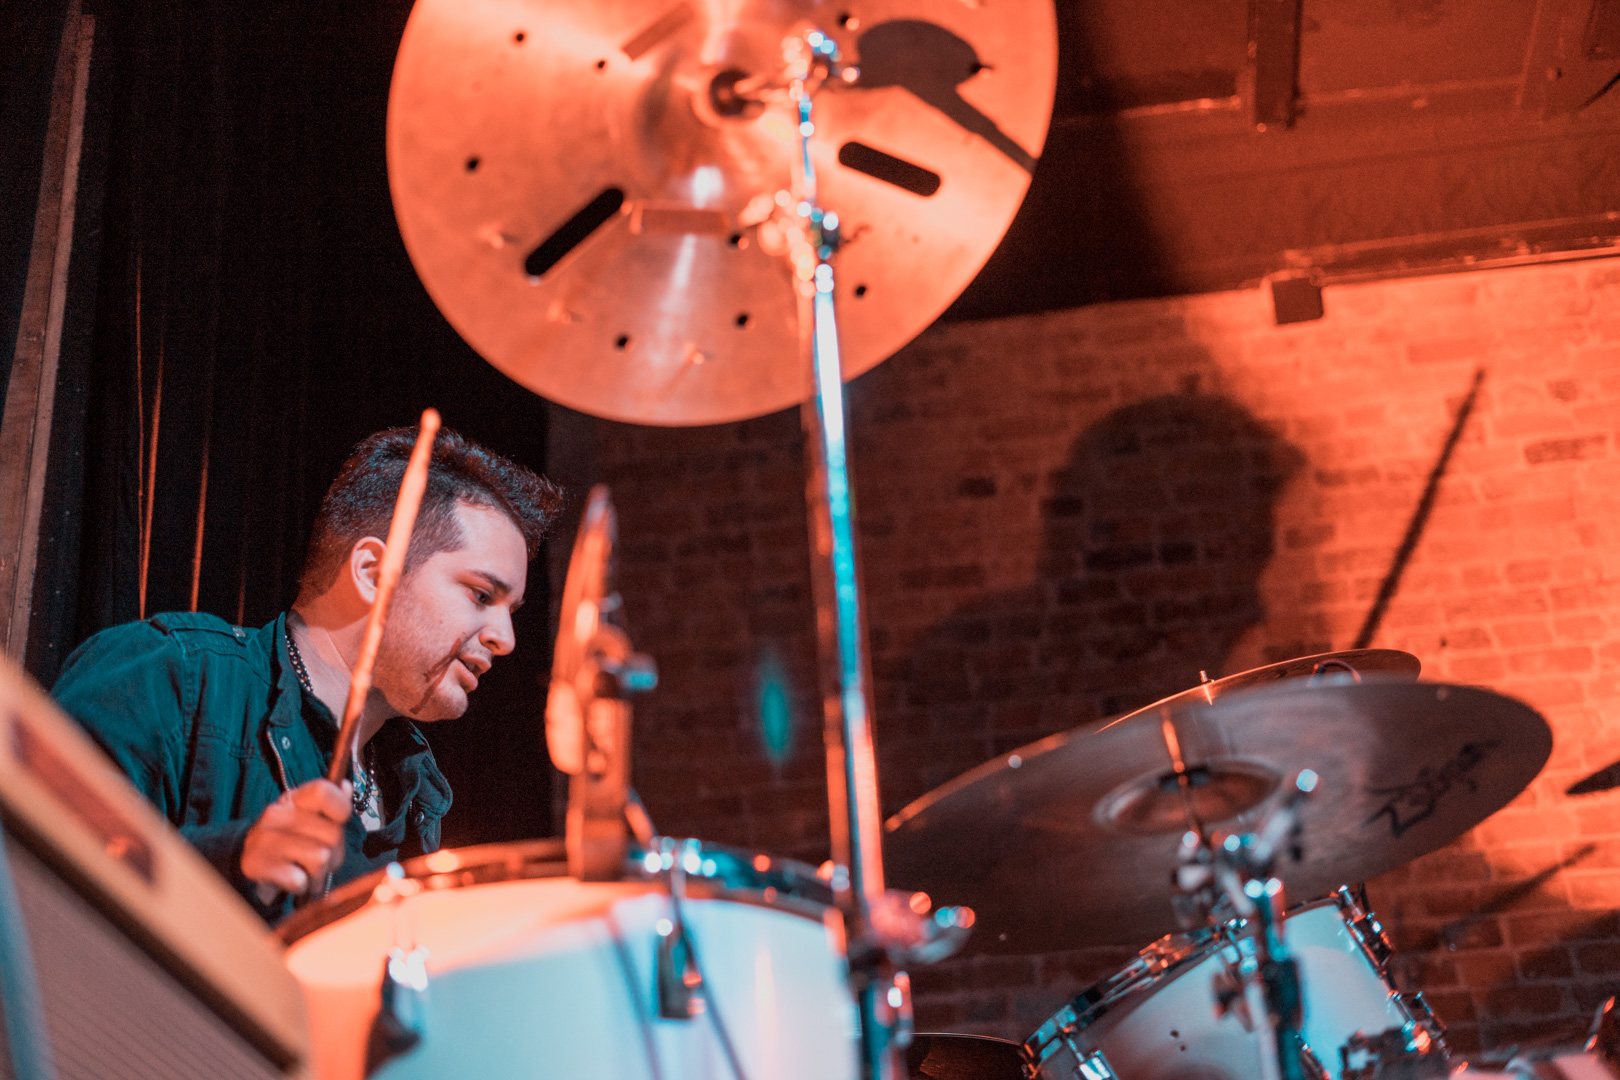 A drummer plays with stage lighting creating a shadow behind him.